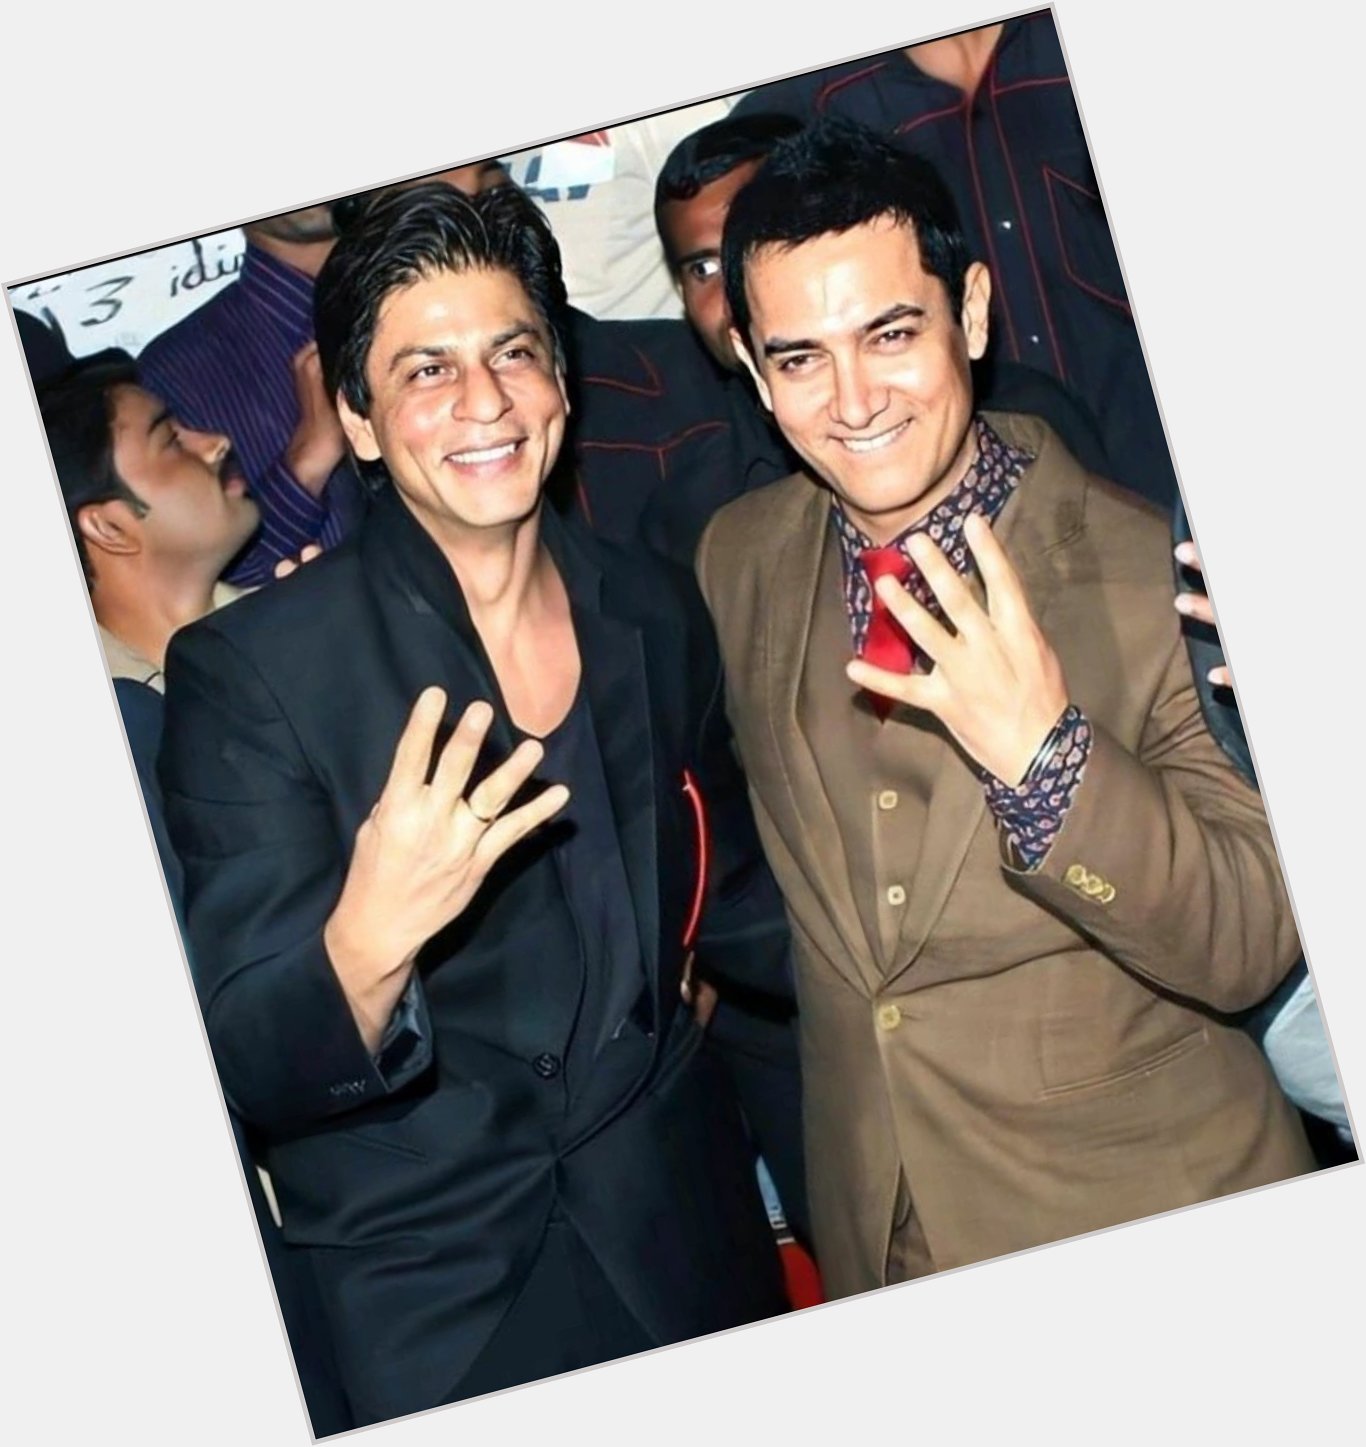 Happy birthday Aamir Khan!
Wishing you lots of love and happiness . 